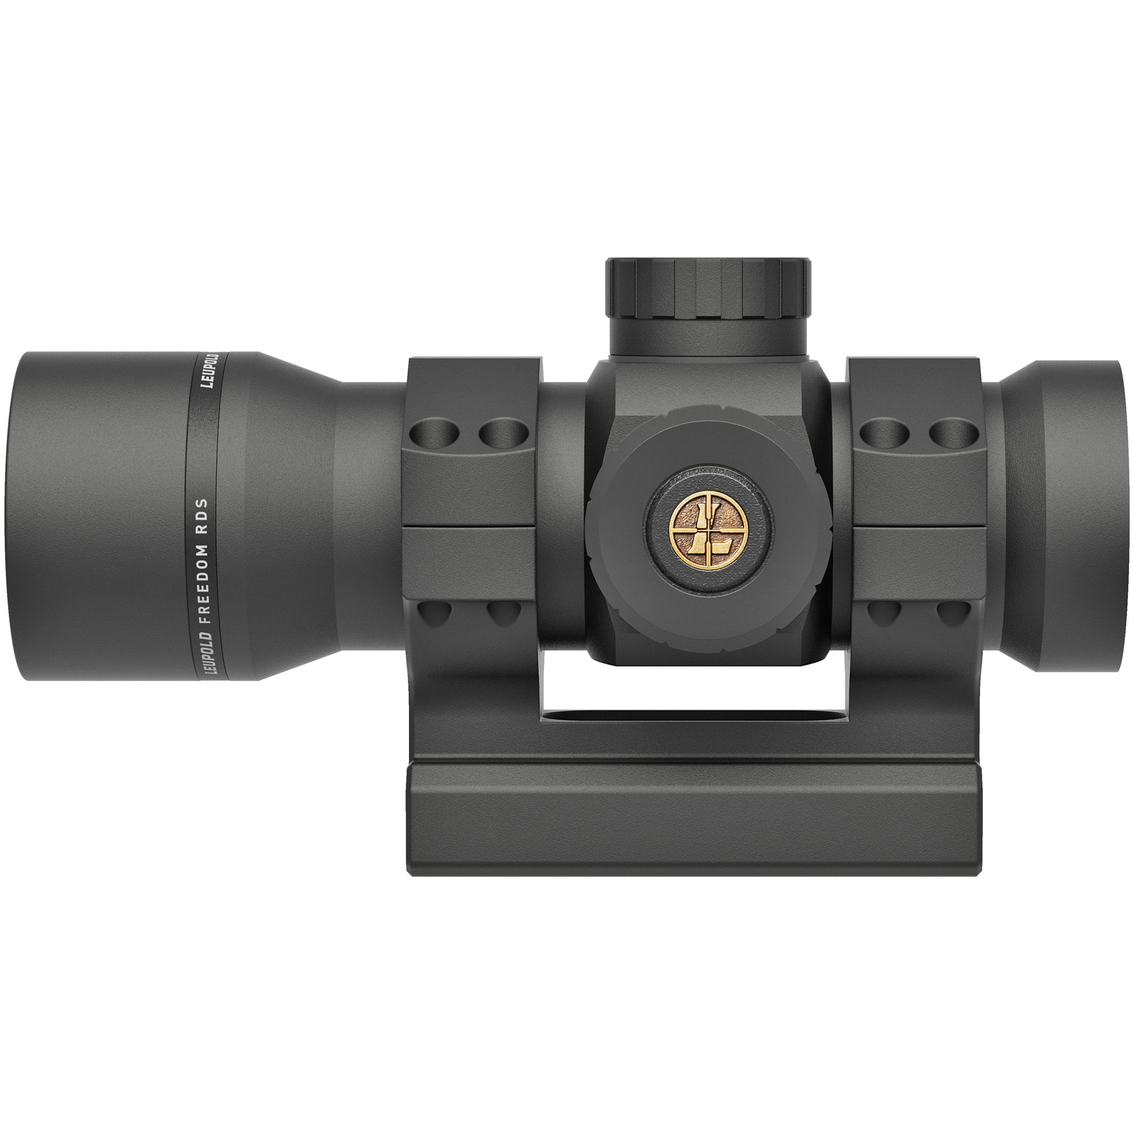 Leupold Freedom RDS 1X27mm Red Dot Sight 1 MOA Dot with AR Mount Black - Image 2 of 2